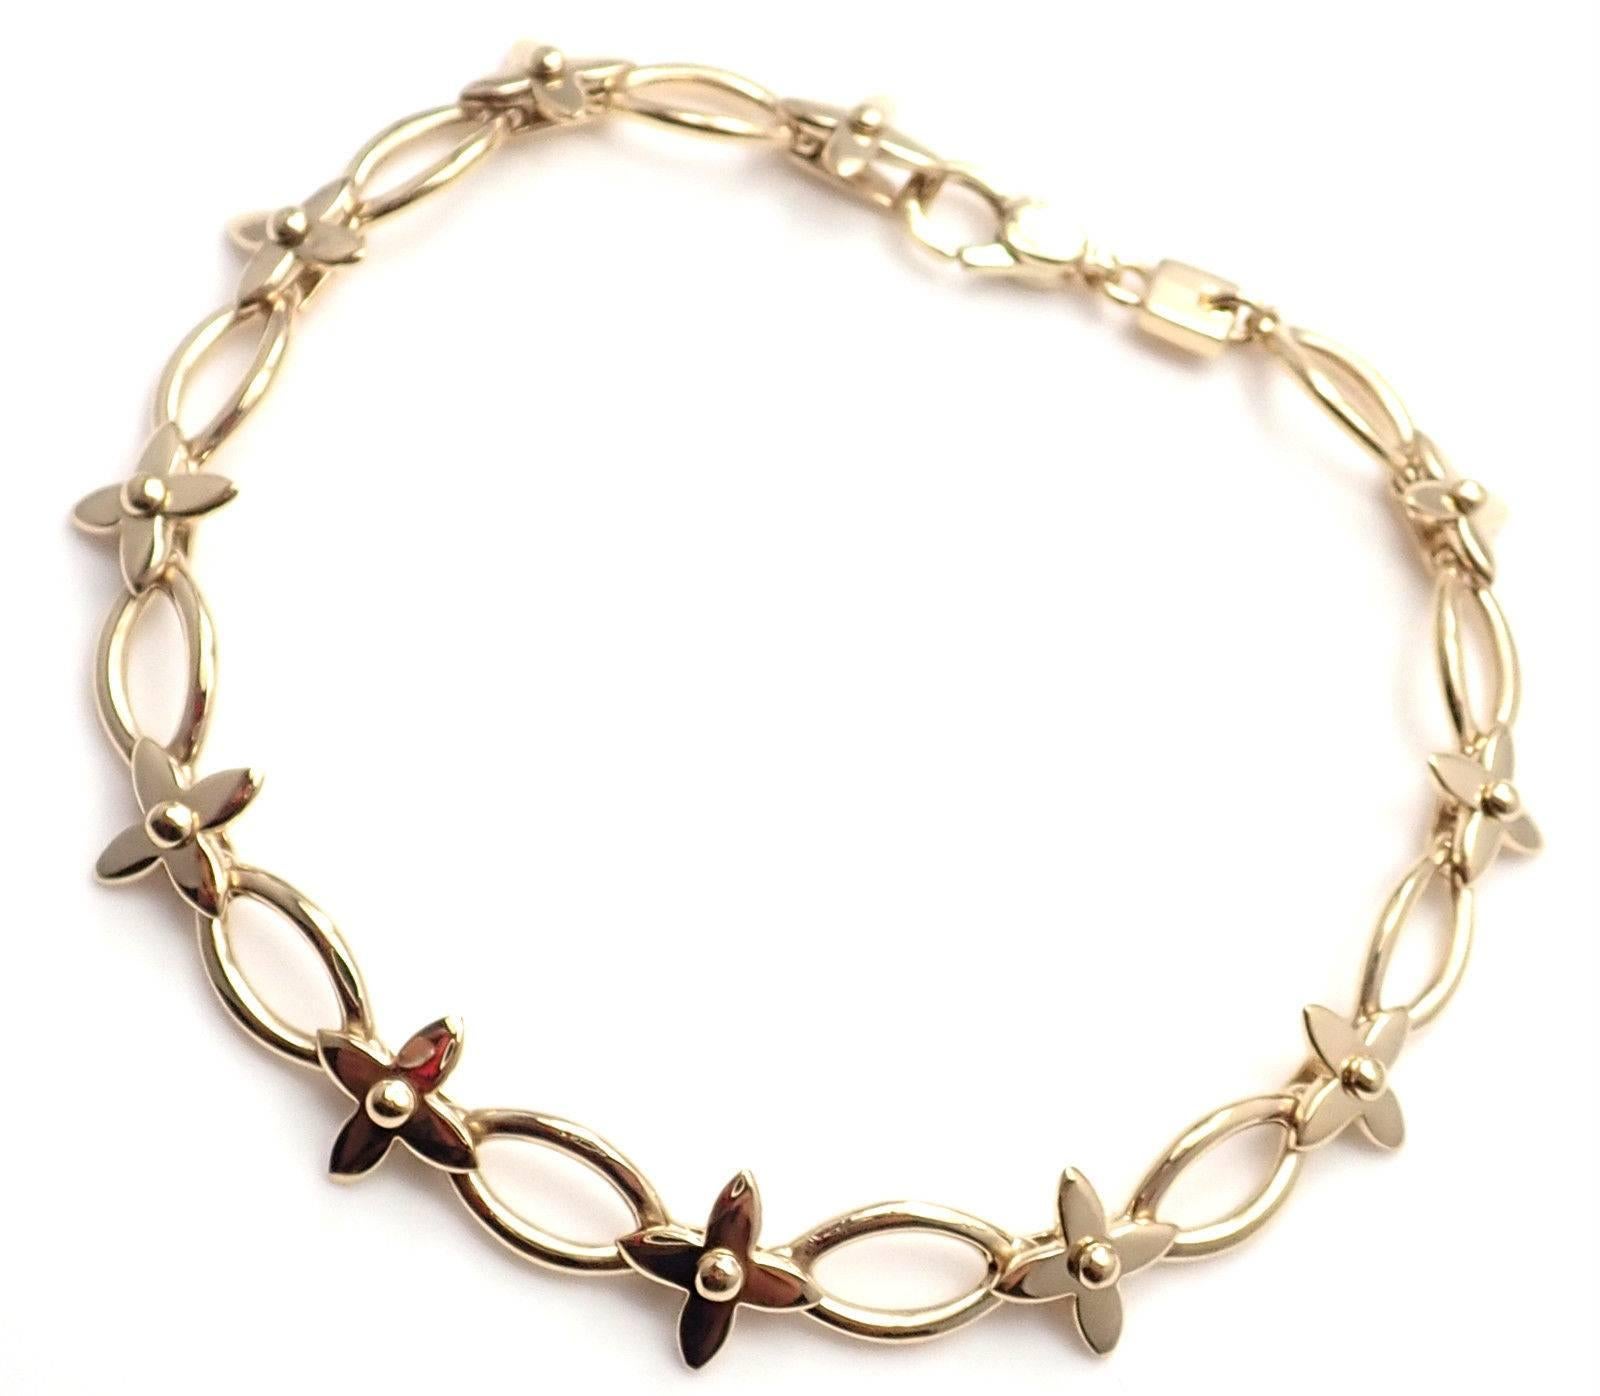 18k Yellow Gold Idylle Blossom Link Bracelet by Louis Vuitton. 
This bracelet is limited edition from year 2006.
Details: 
Length: 7